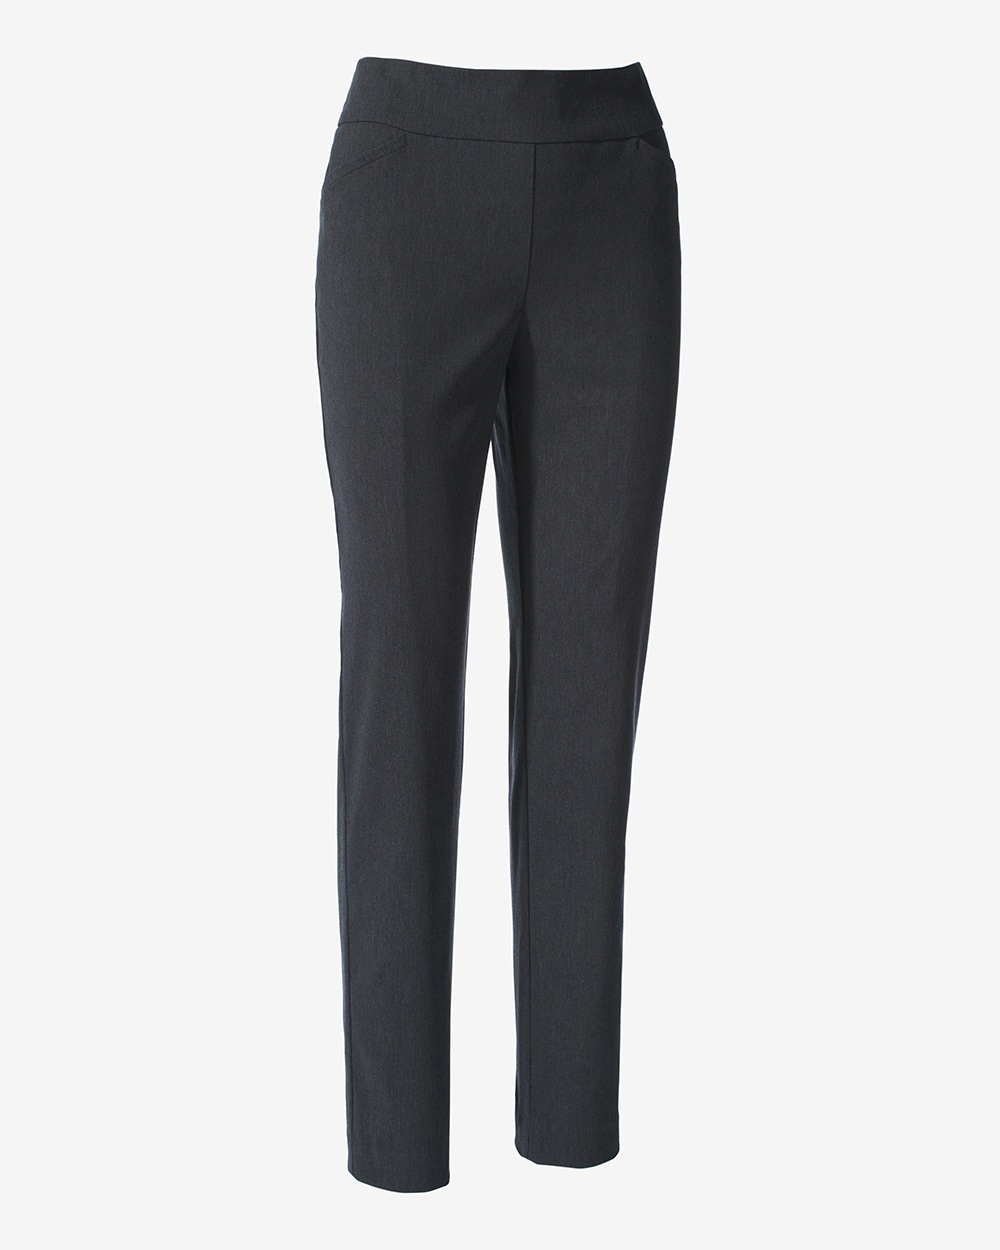 Perfect Stretch Fabulously Slimming Pants